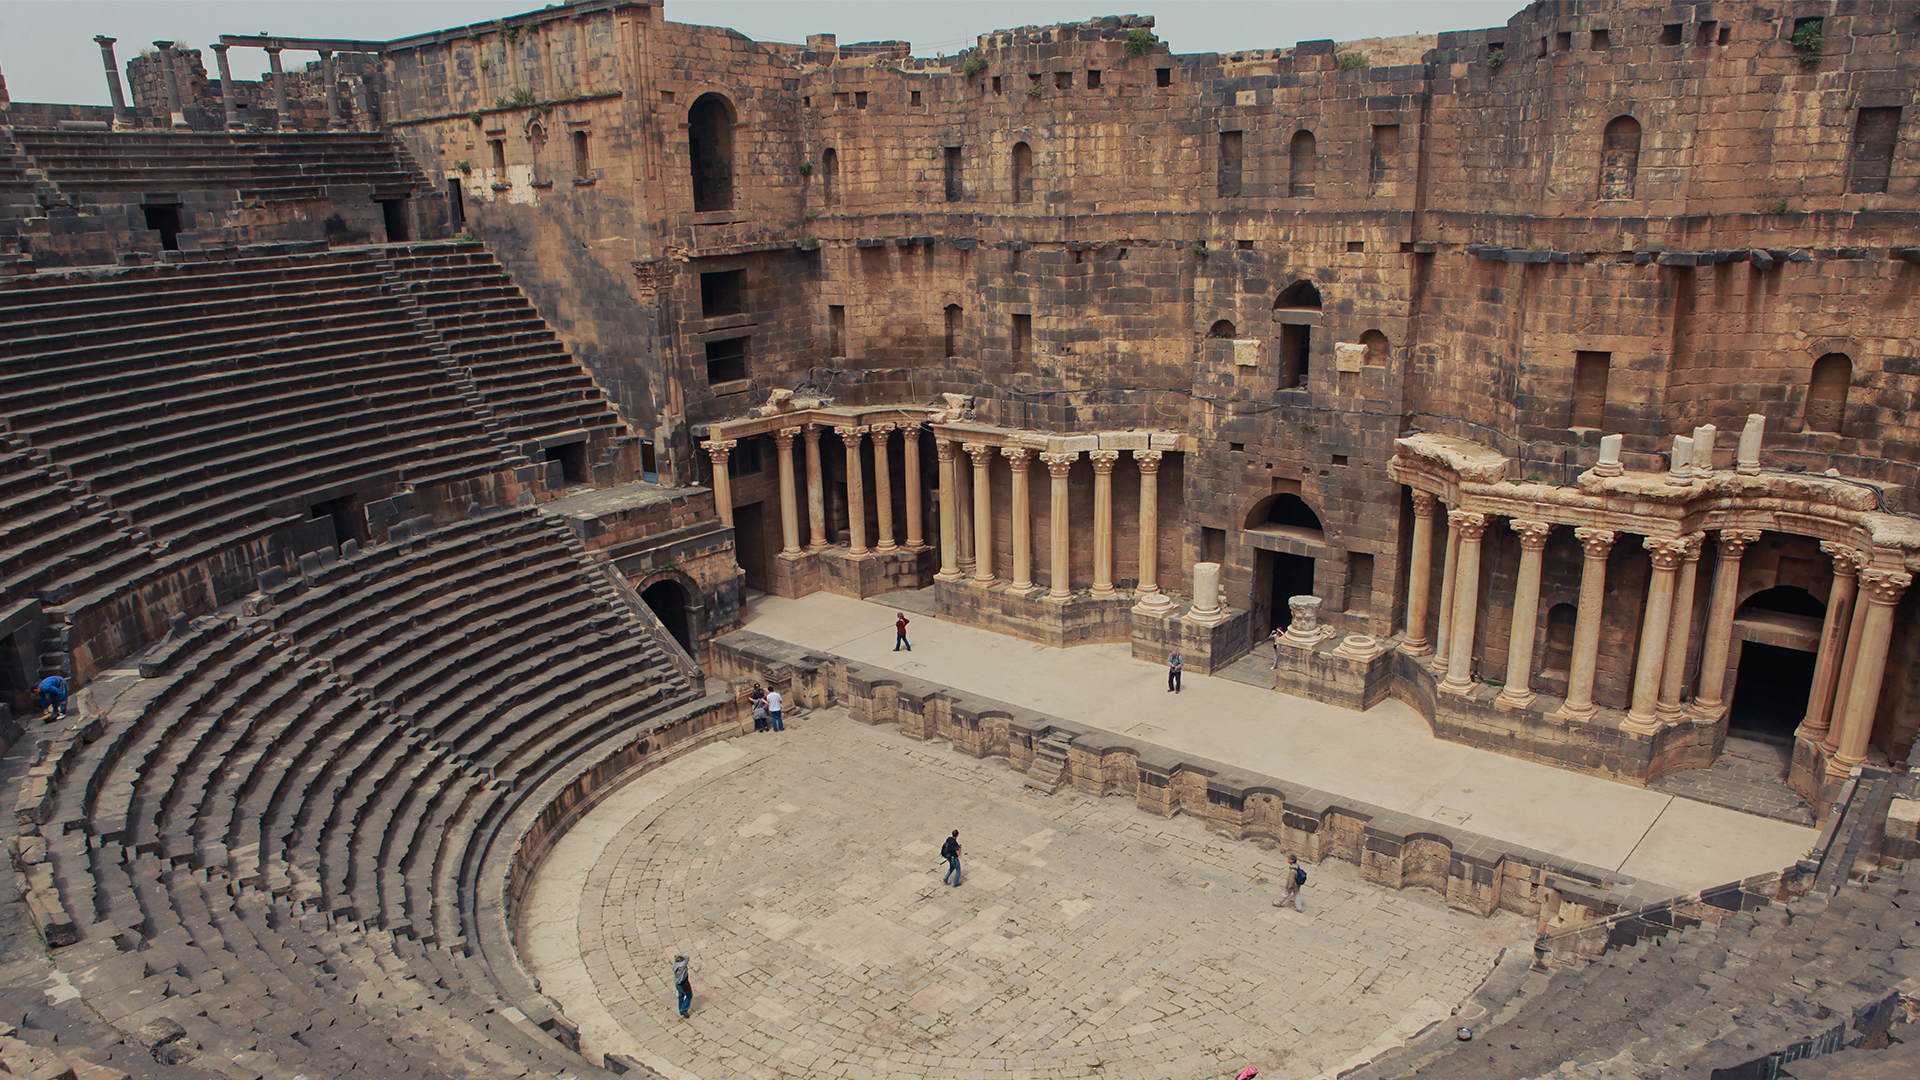 A picturesque view unfolds he Roman Amphitheatre of Bosra, adorned with a scattering of tourists across its grand courtyard.